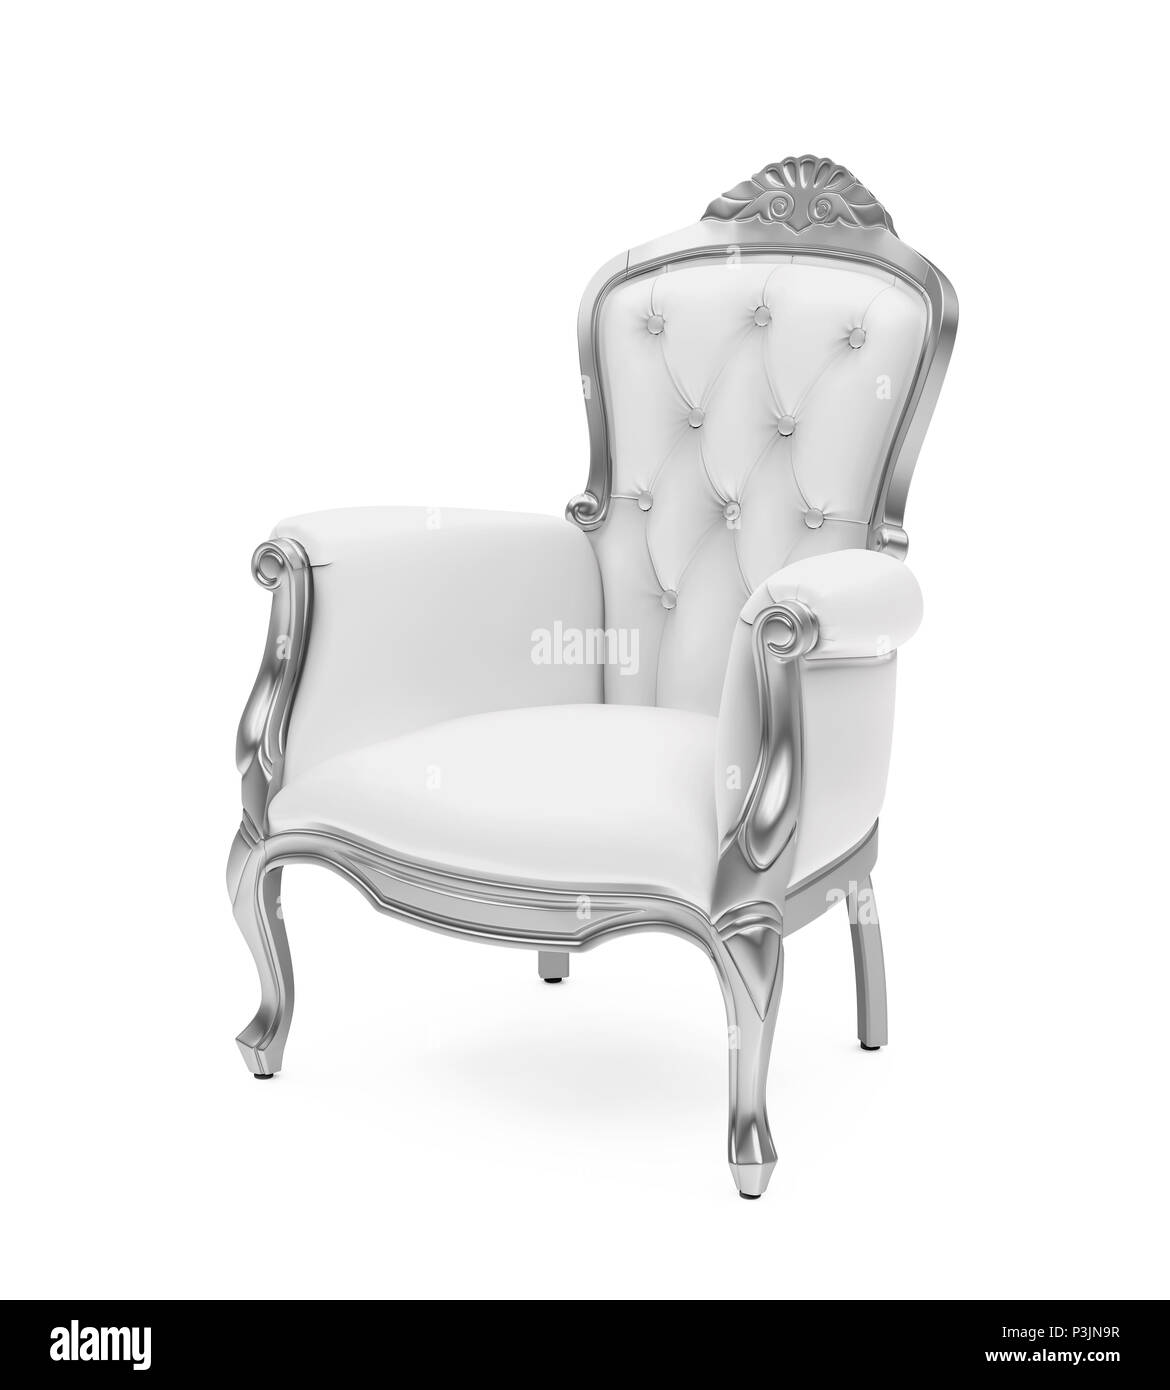 Throne Chair Isolated Stock Photo